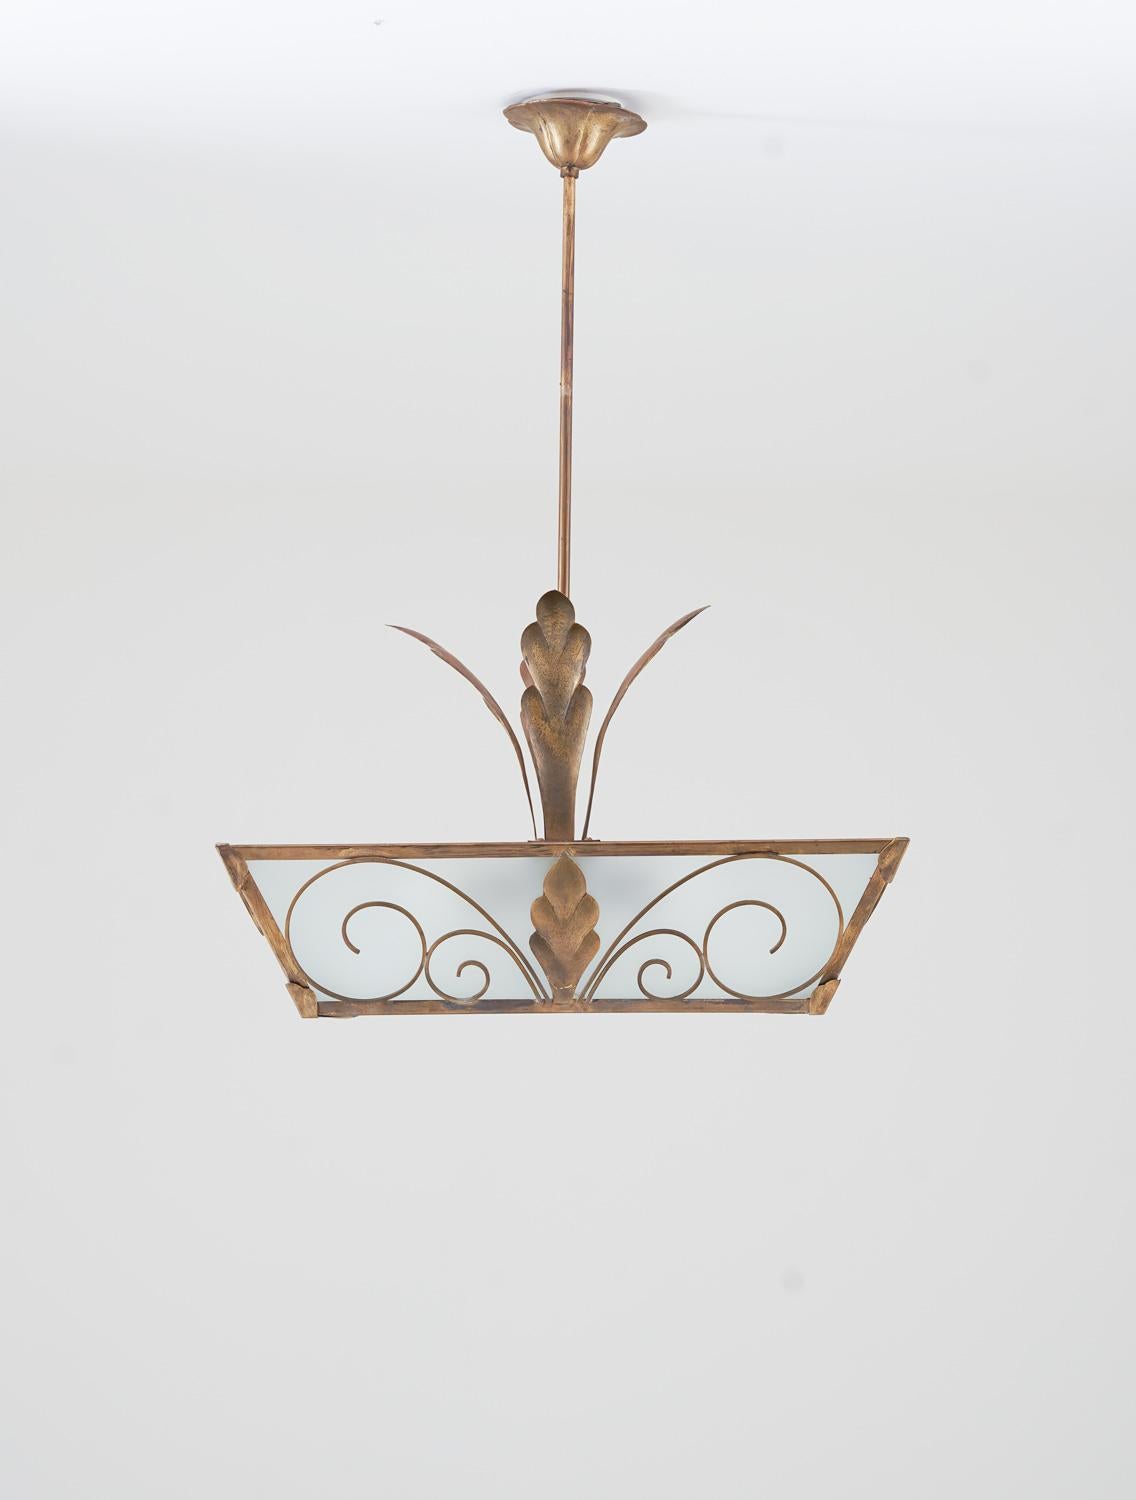 Custom made ceiling light fixture by Lars Holmström, Arvika, Sweden.
This majestic lamp features two light sources and is made of brass and glass.
Lars Holmström is known as being one of the most skilled blacksmiths at the time and made many